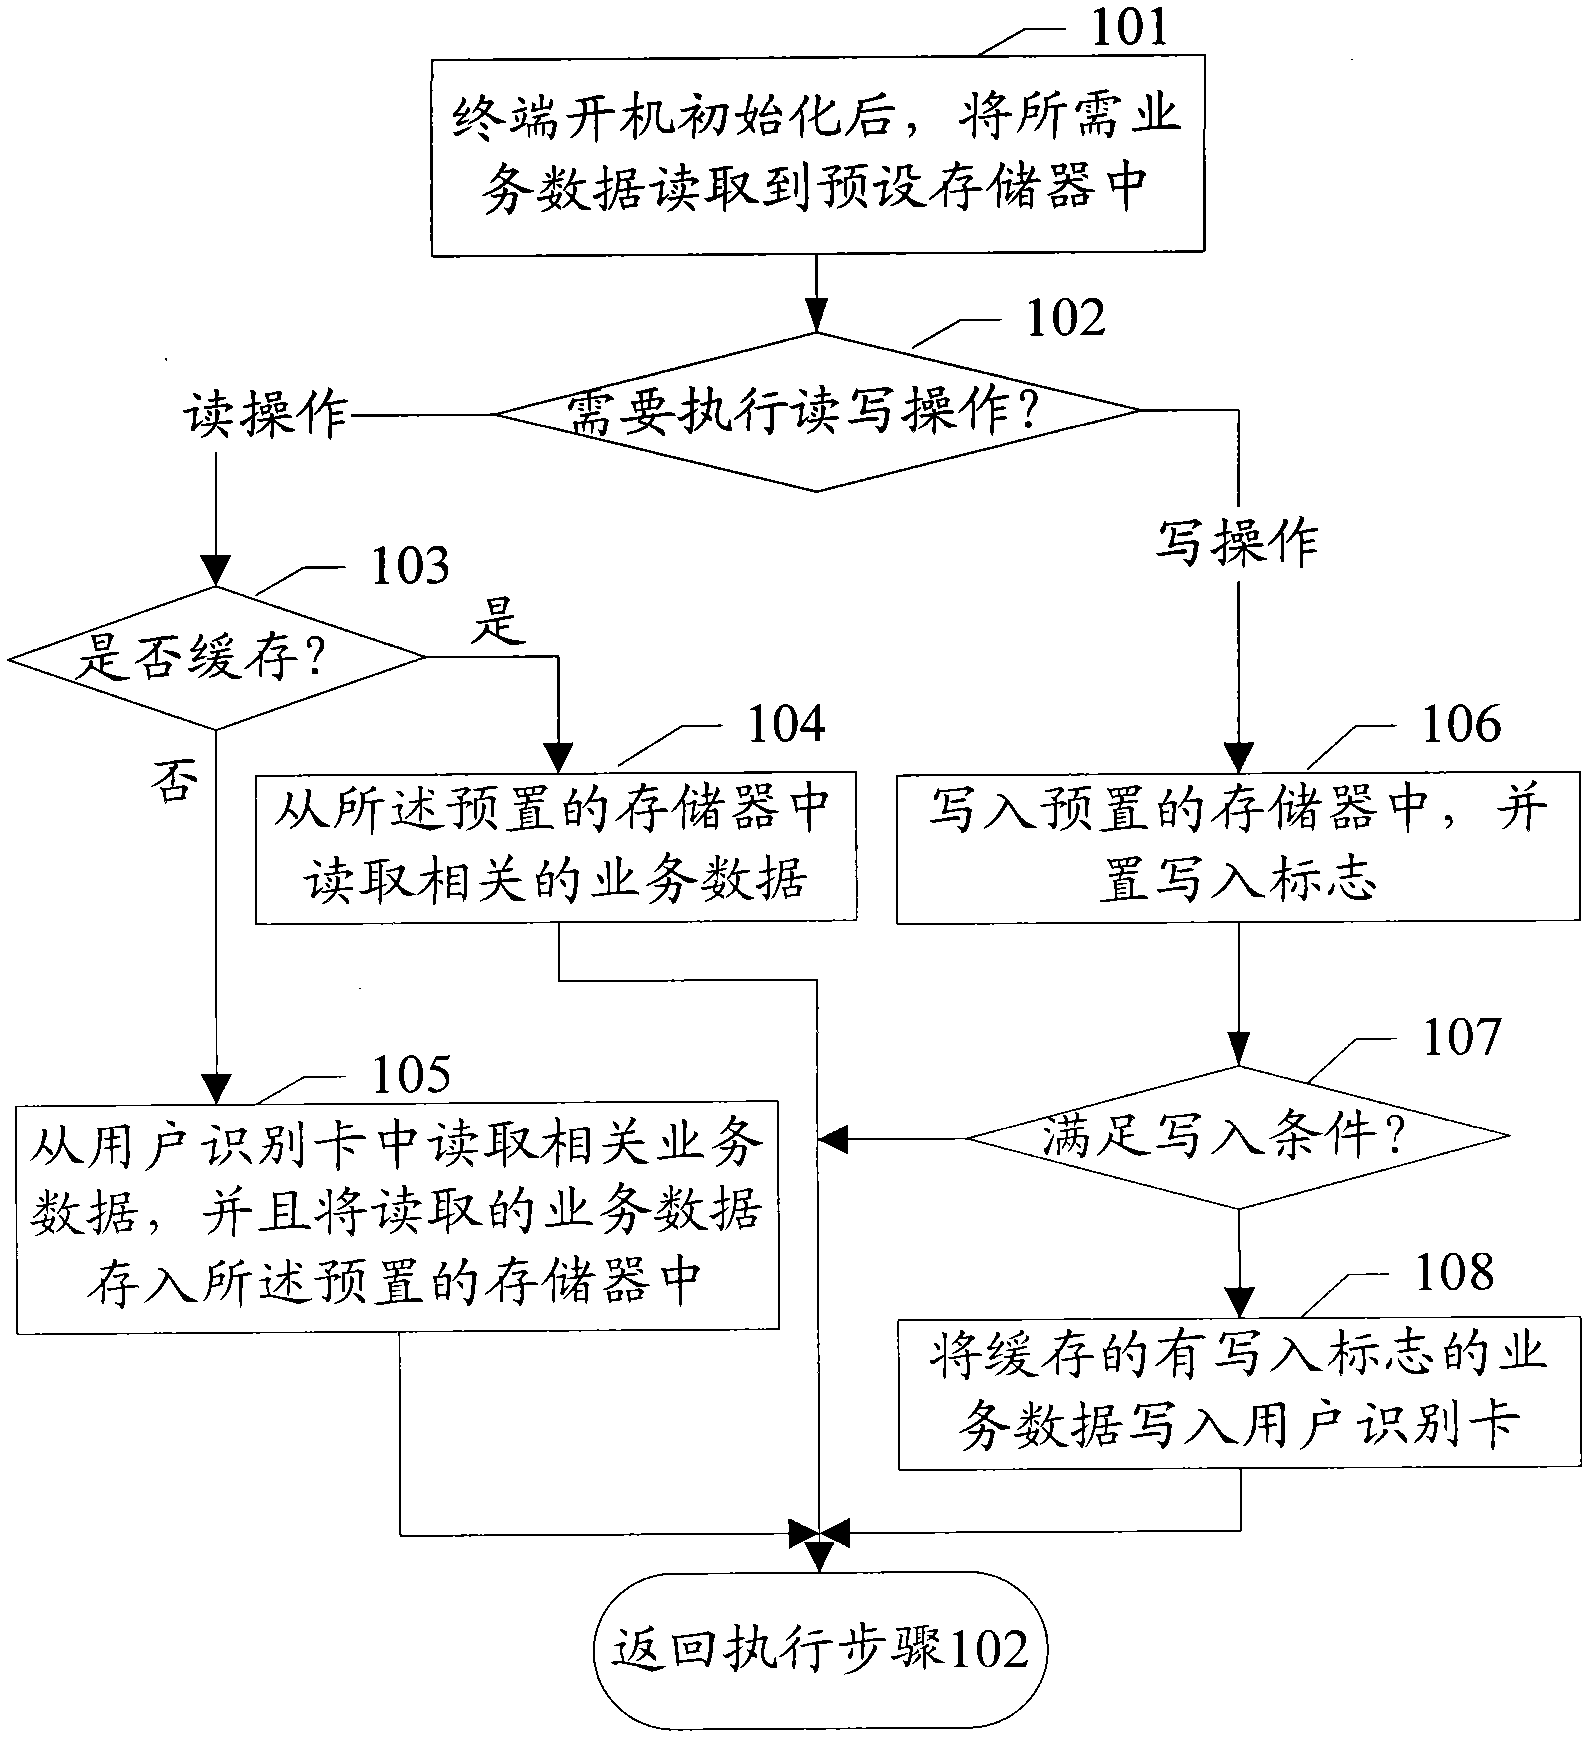 Method and device for decreasing frequency of erasing and writing subscriber identity module files